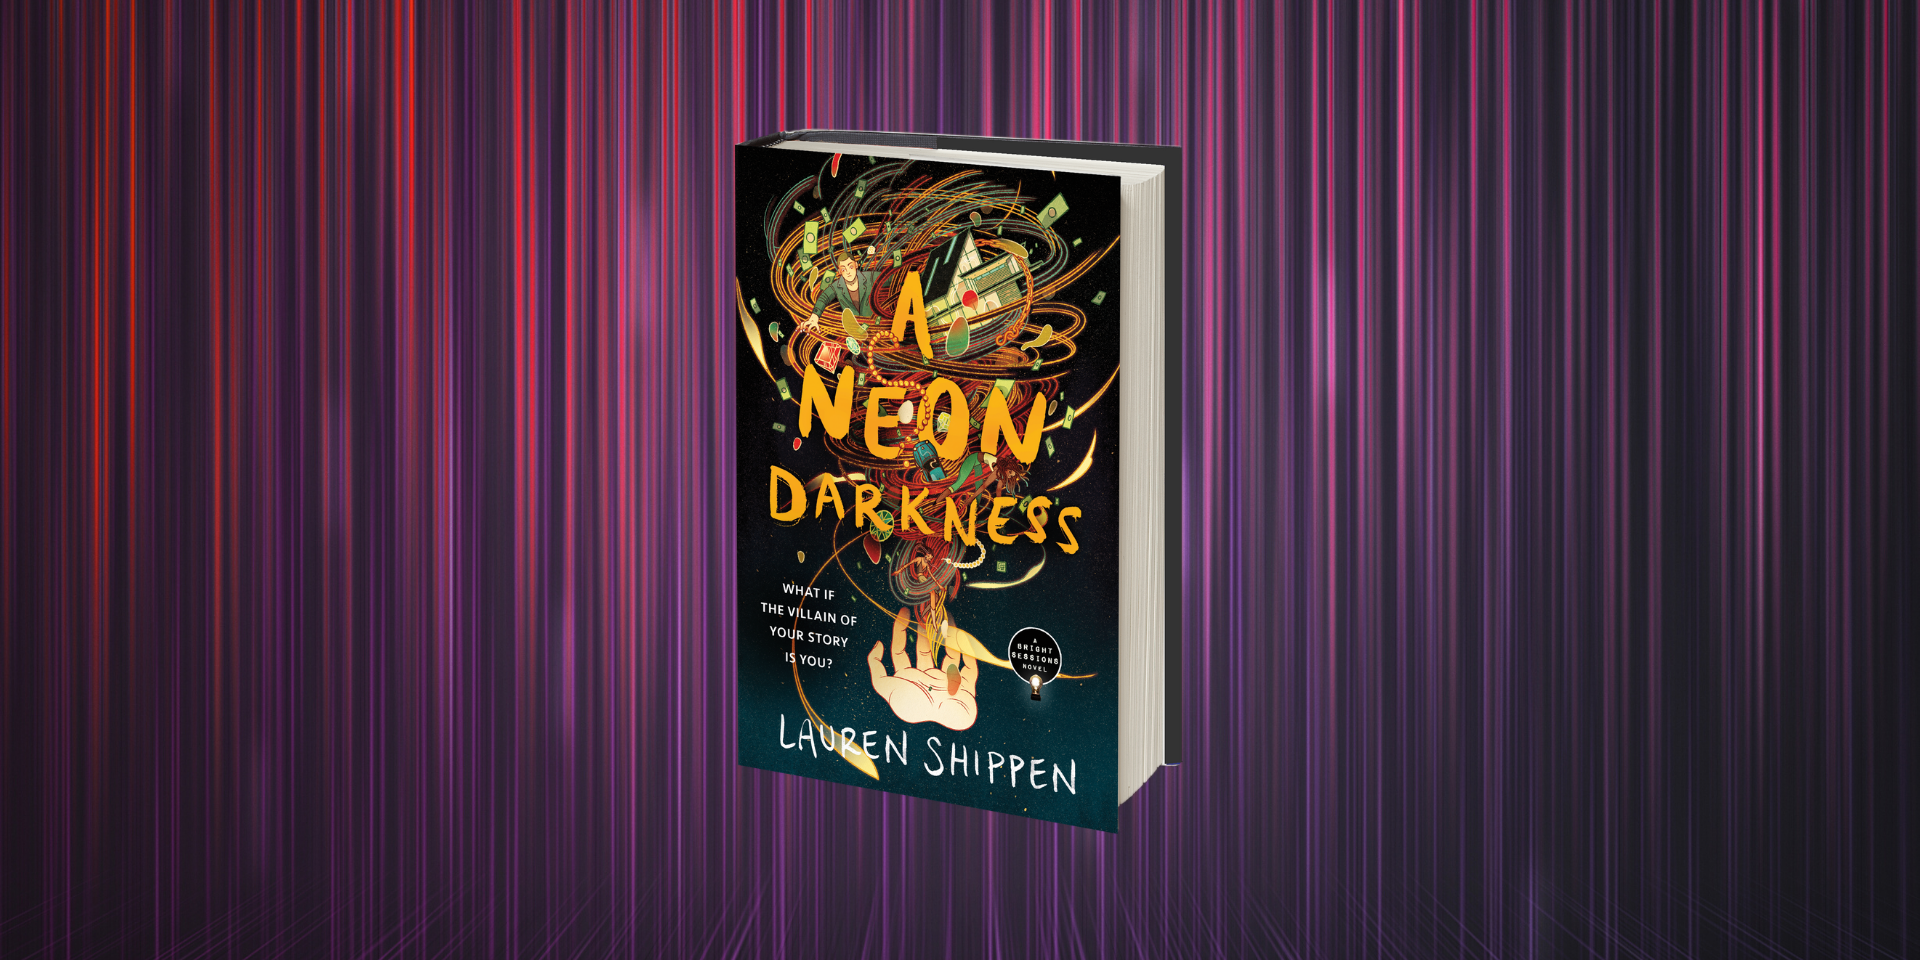 Download a Free Digital Preview of <i>A Neon Darkness</i> by Lauren Shippen!